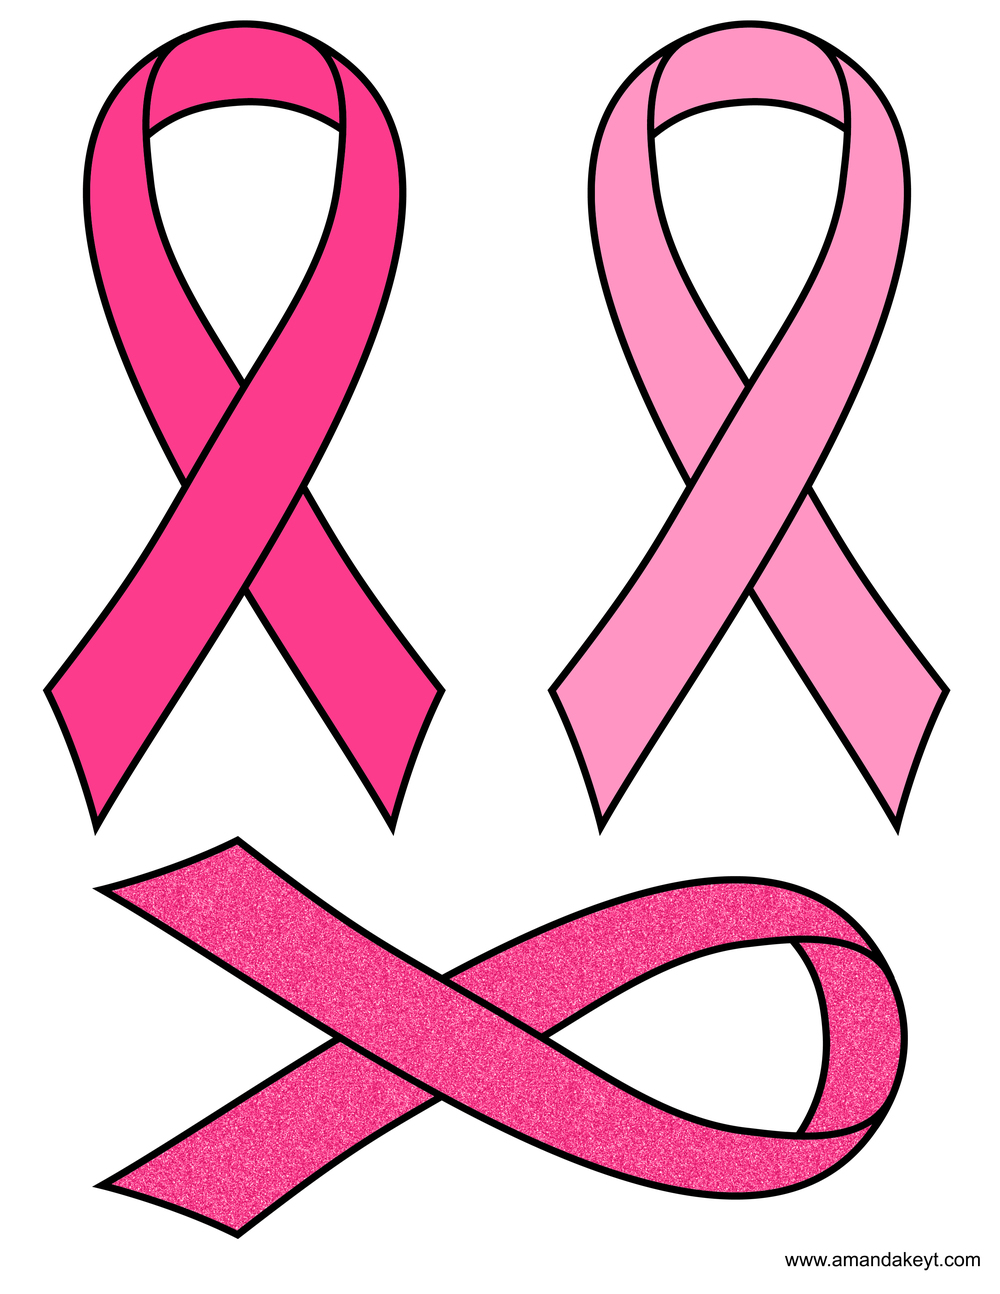 free-breast-cancer-ribbon-vector-art-free-download-free-breast-cancer